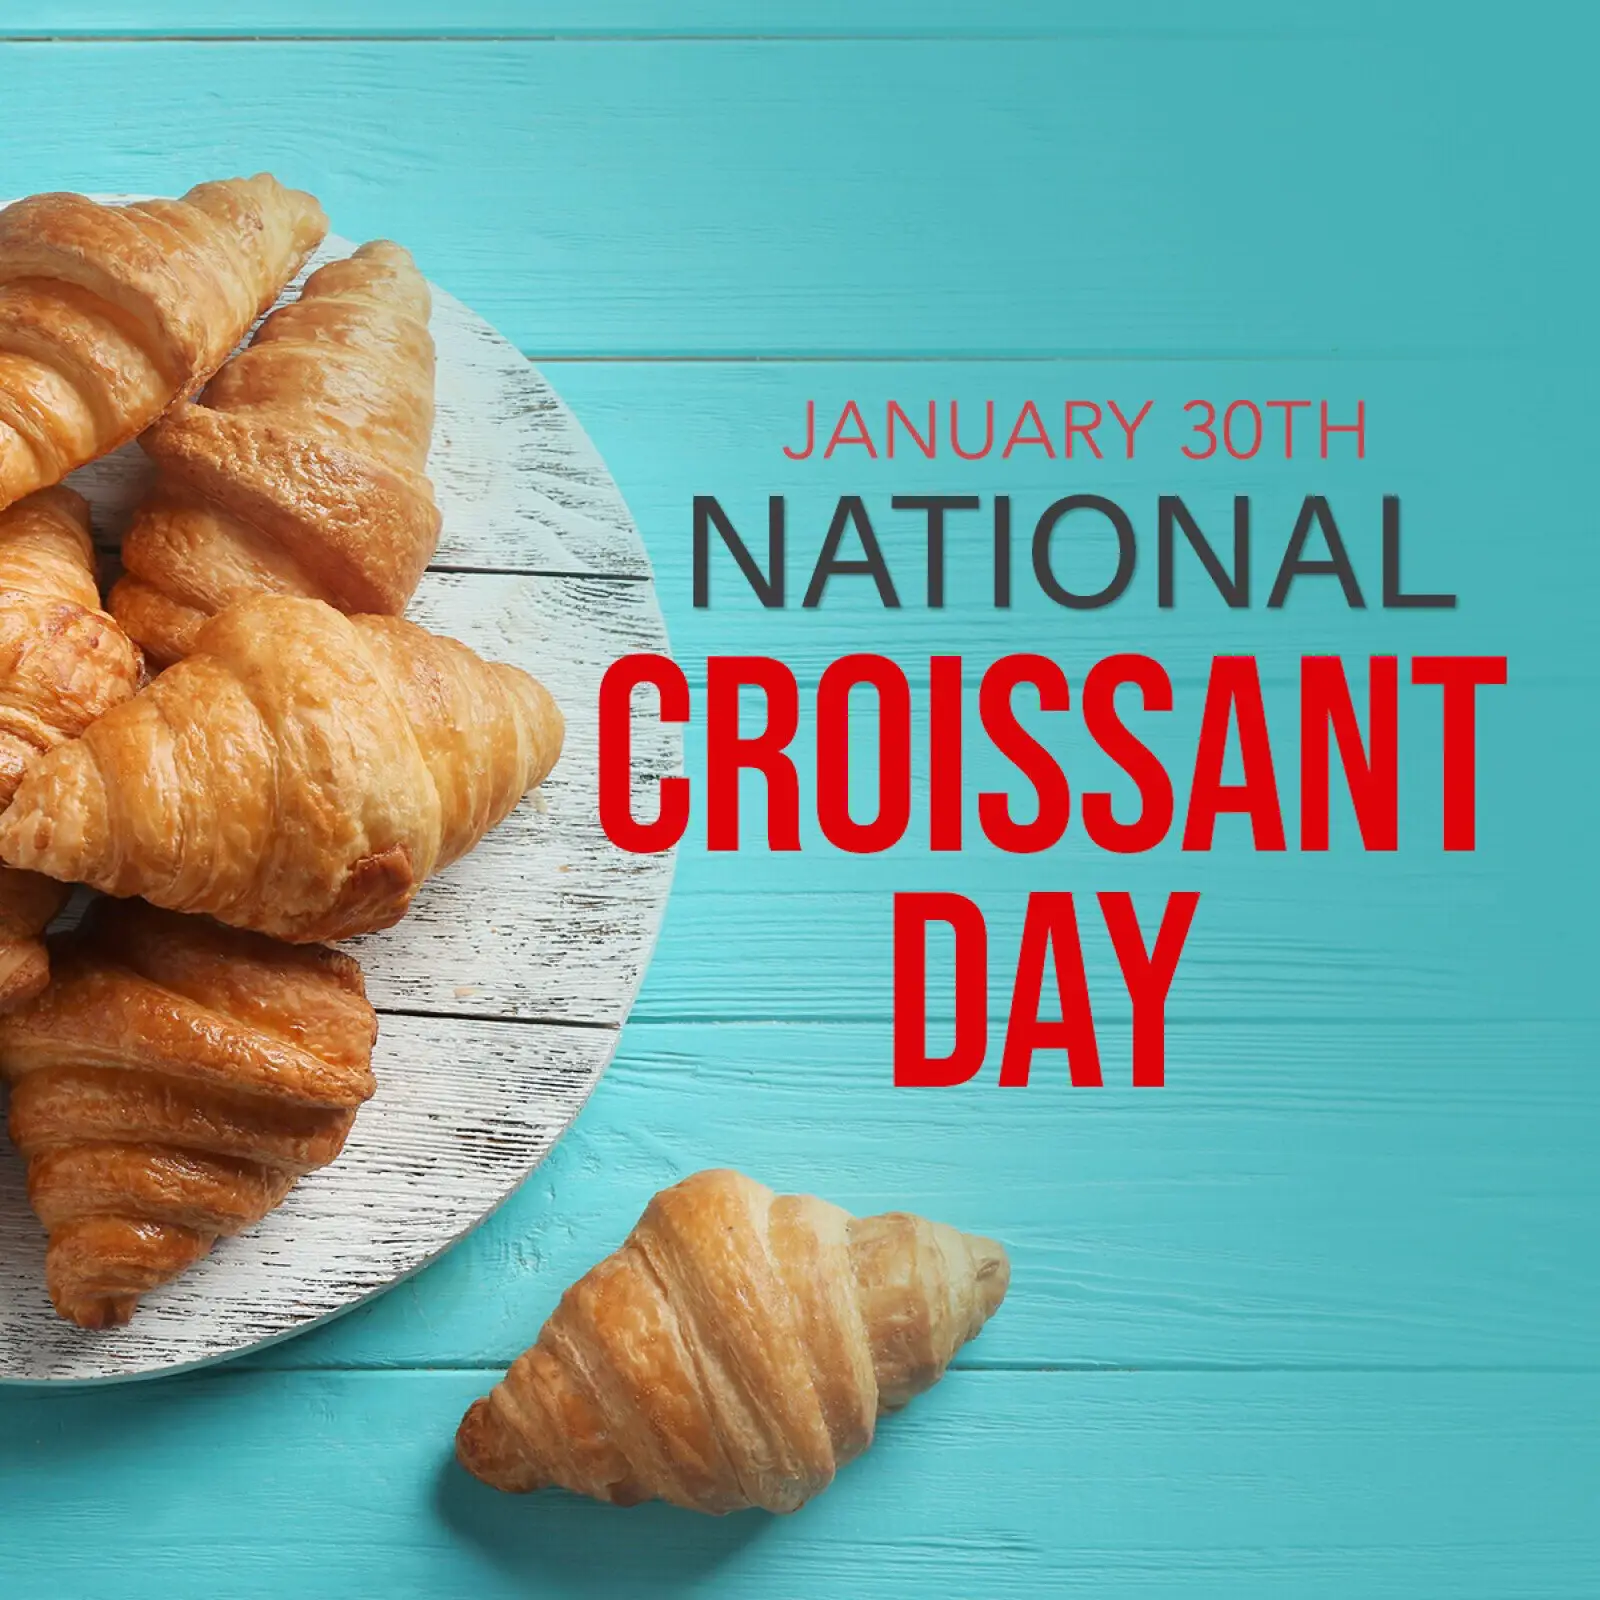 National croissant day! 's images